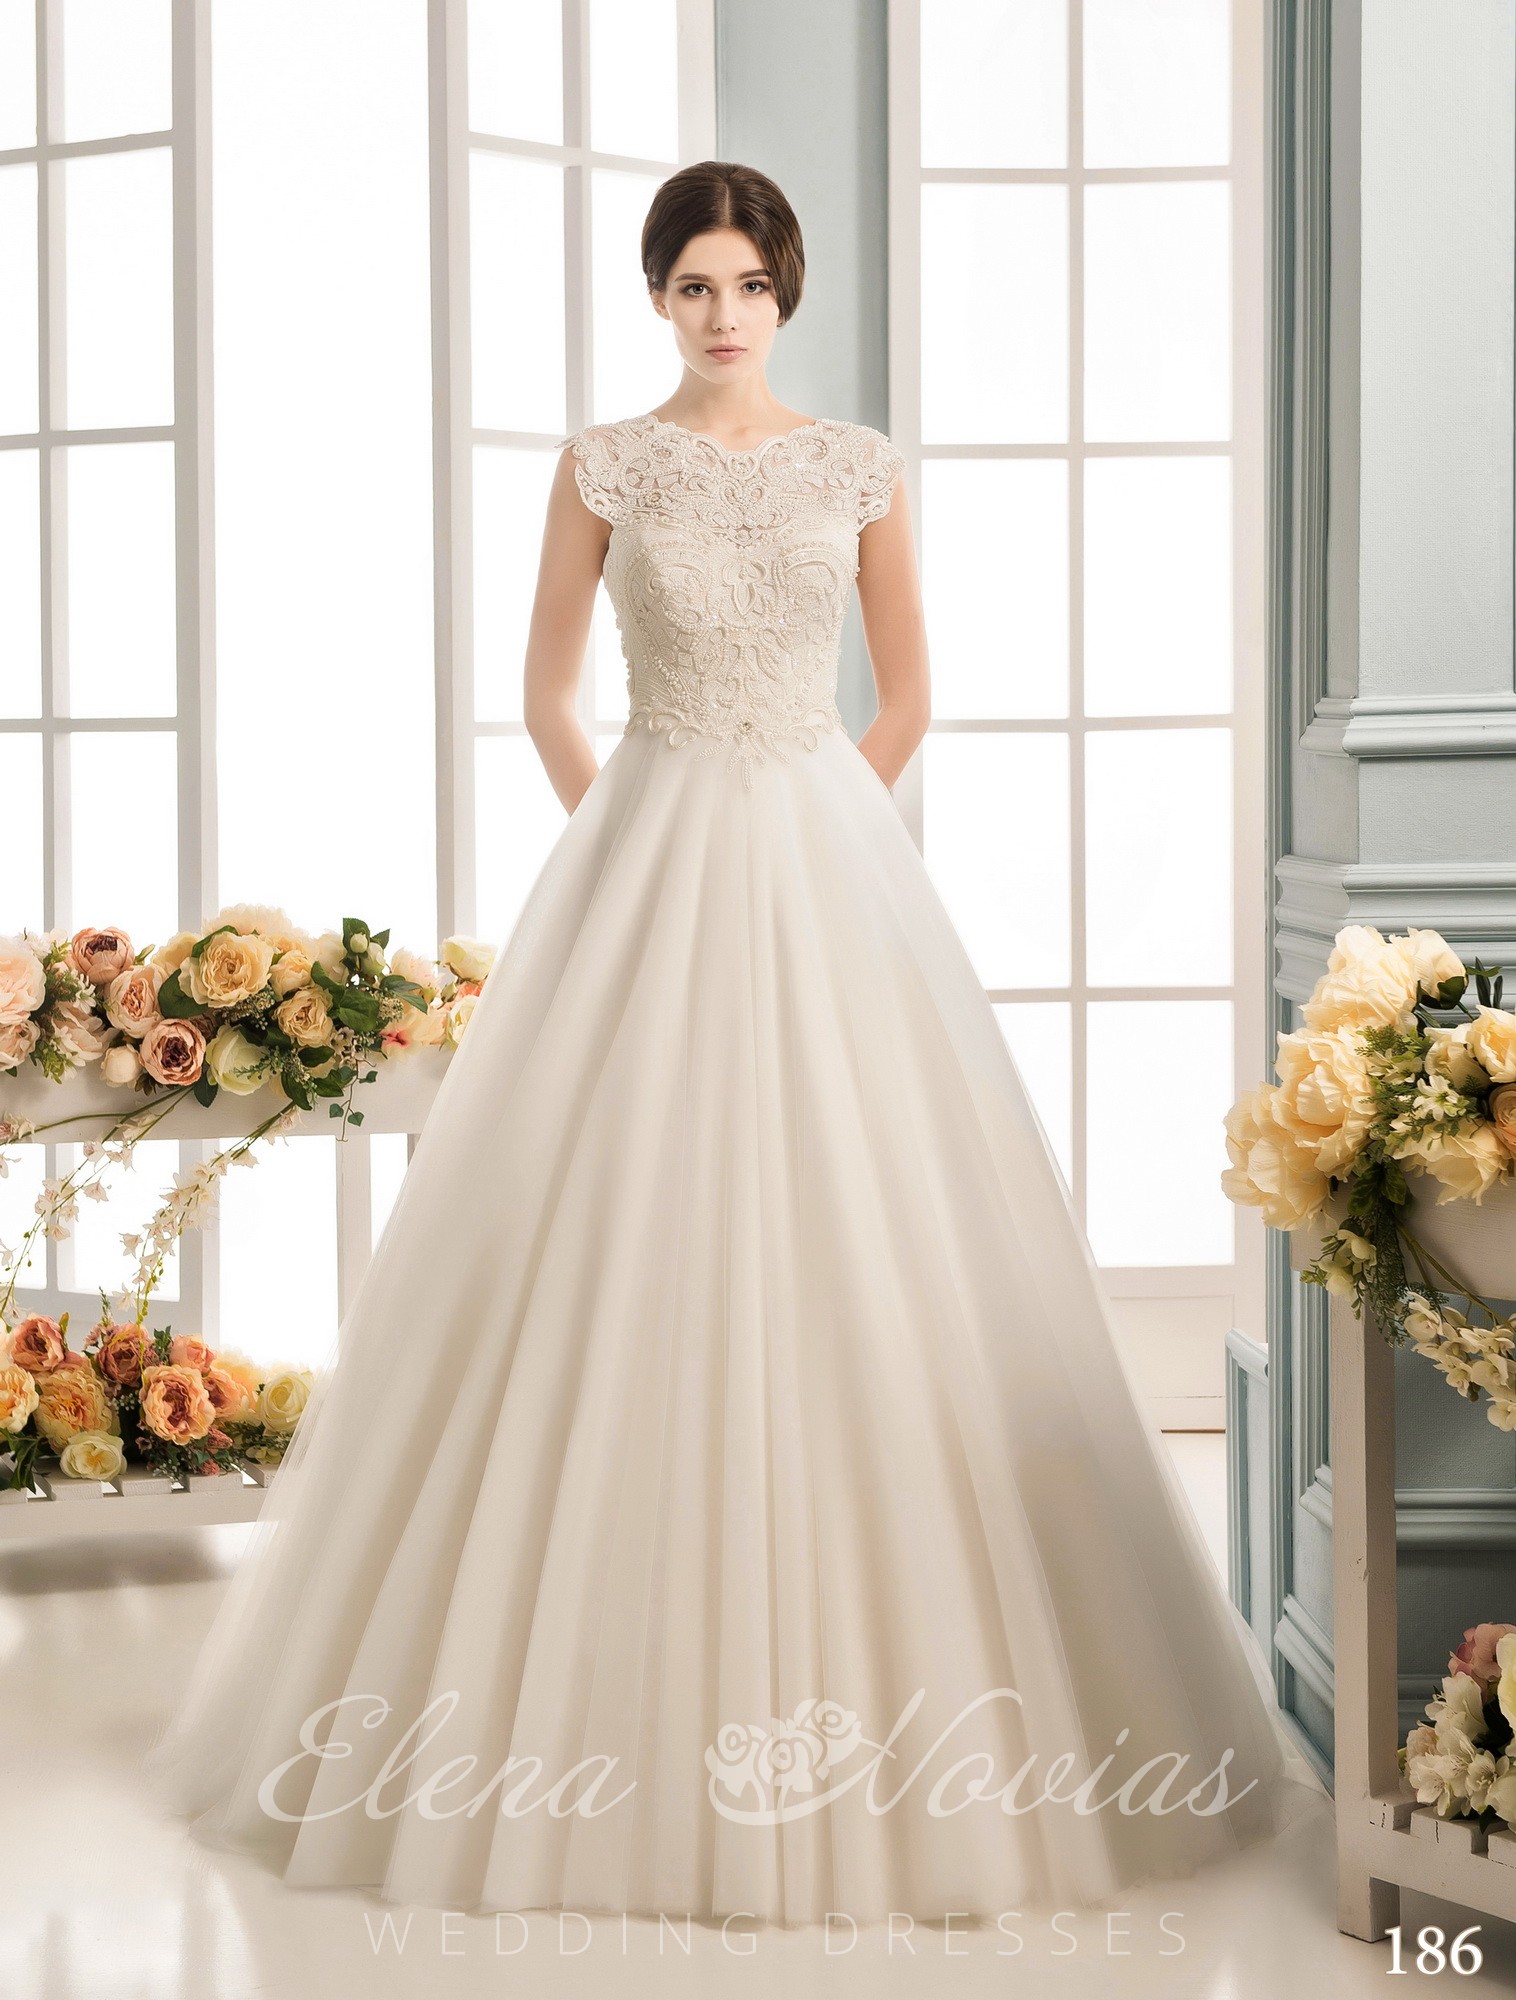 Top Wholesale Wedding Dress of the decade Don t miss out 